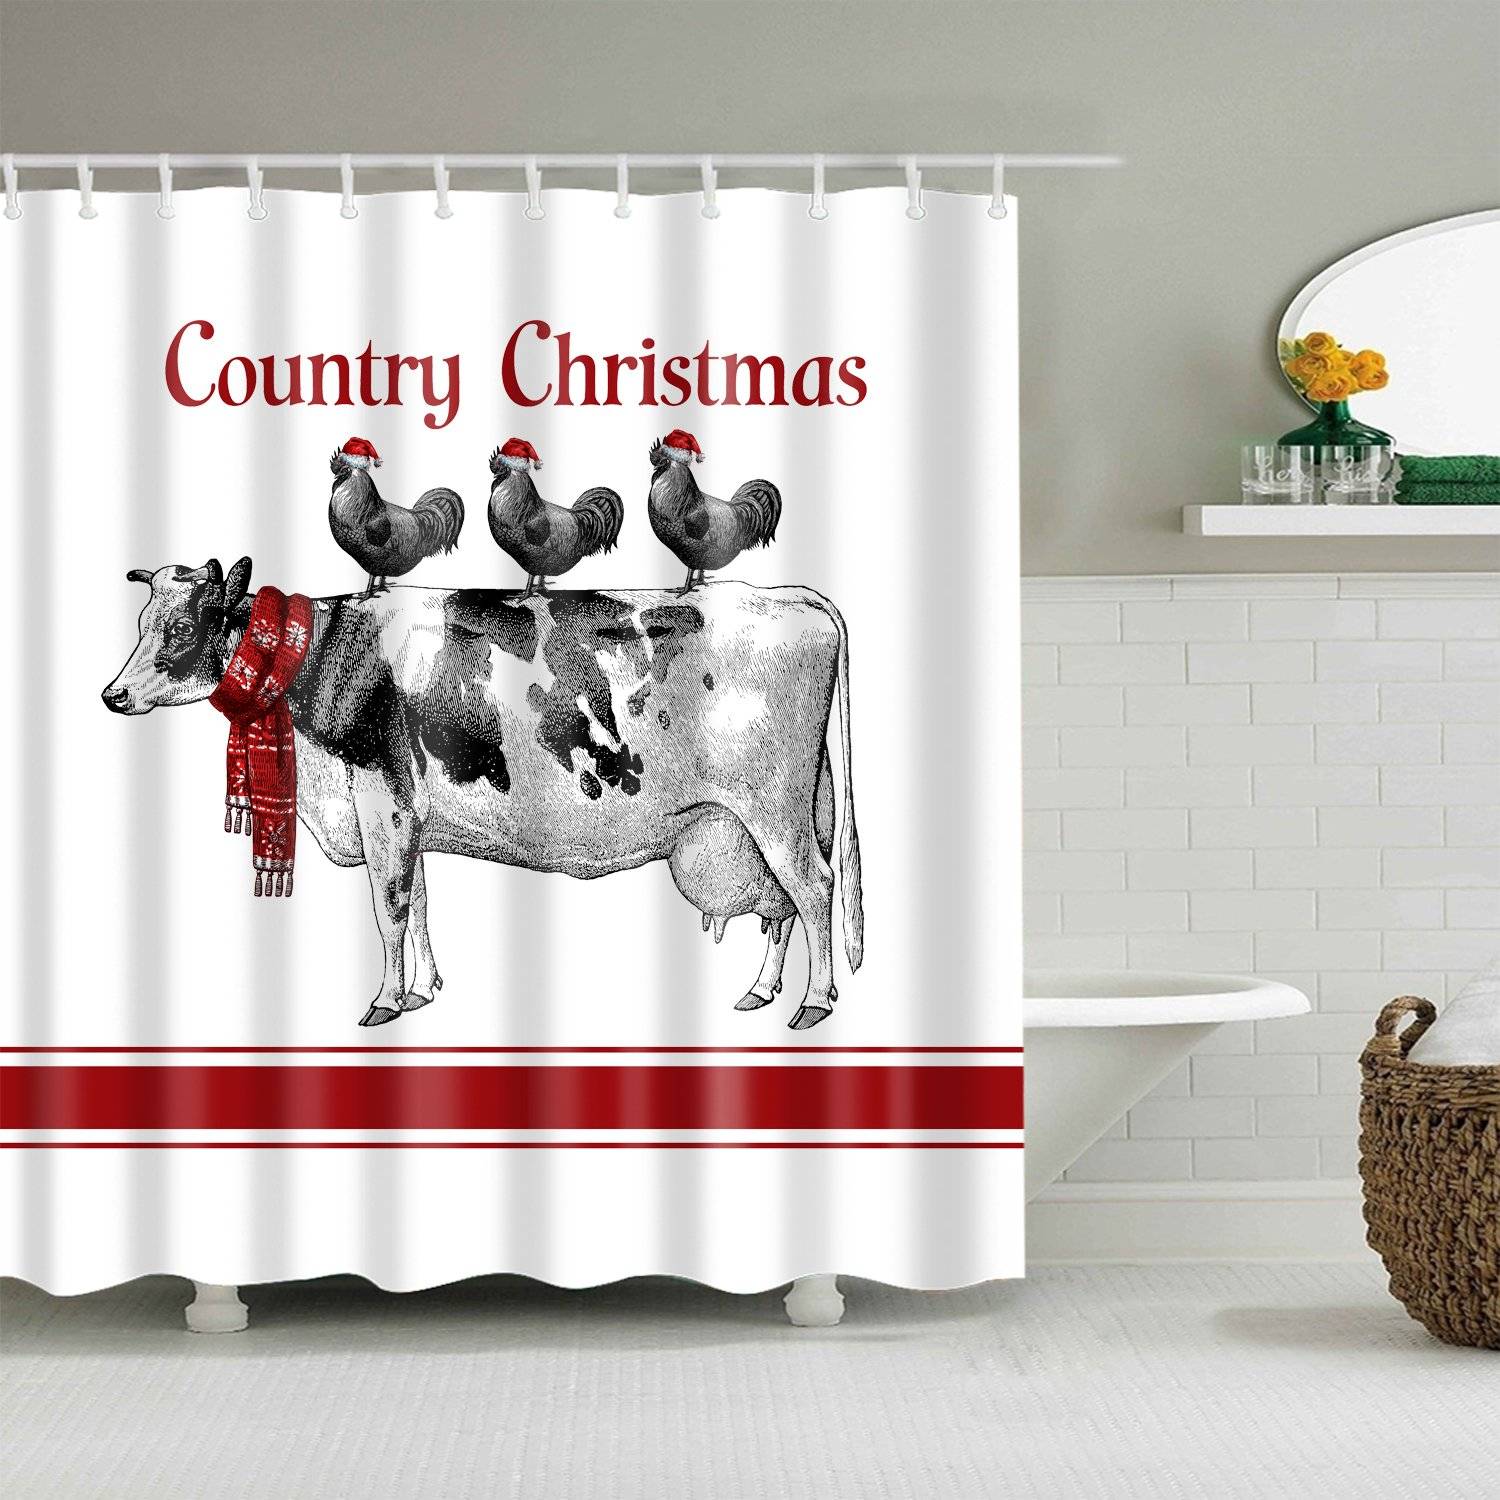 Farmhouse Animal Cow with Chickens Country Christmas Shower Curtain